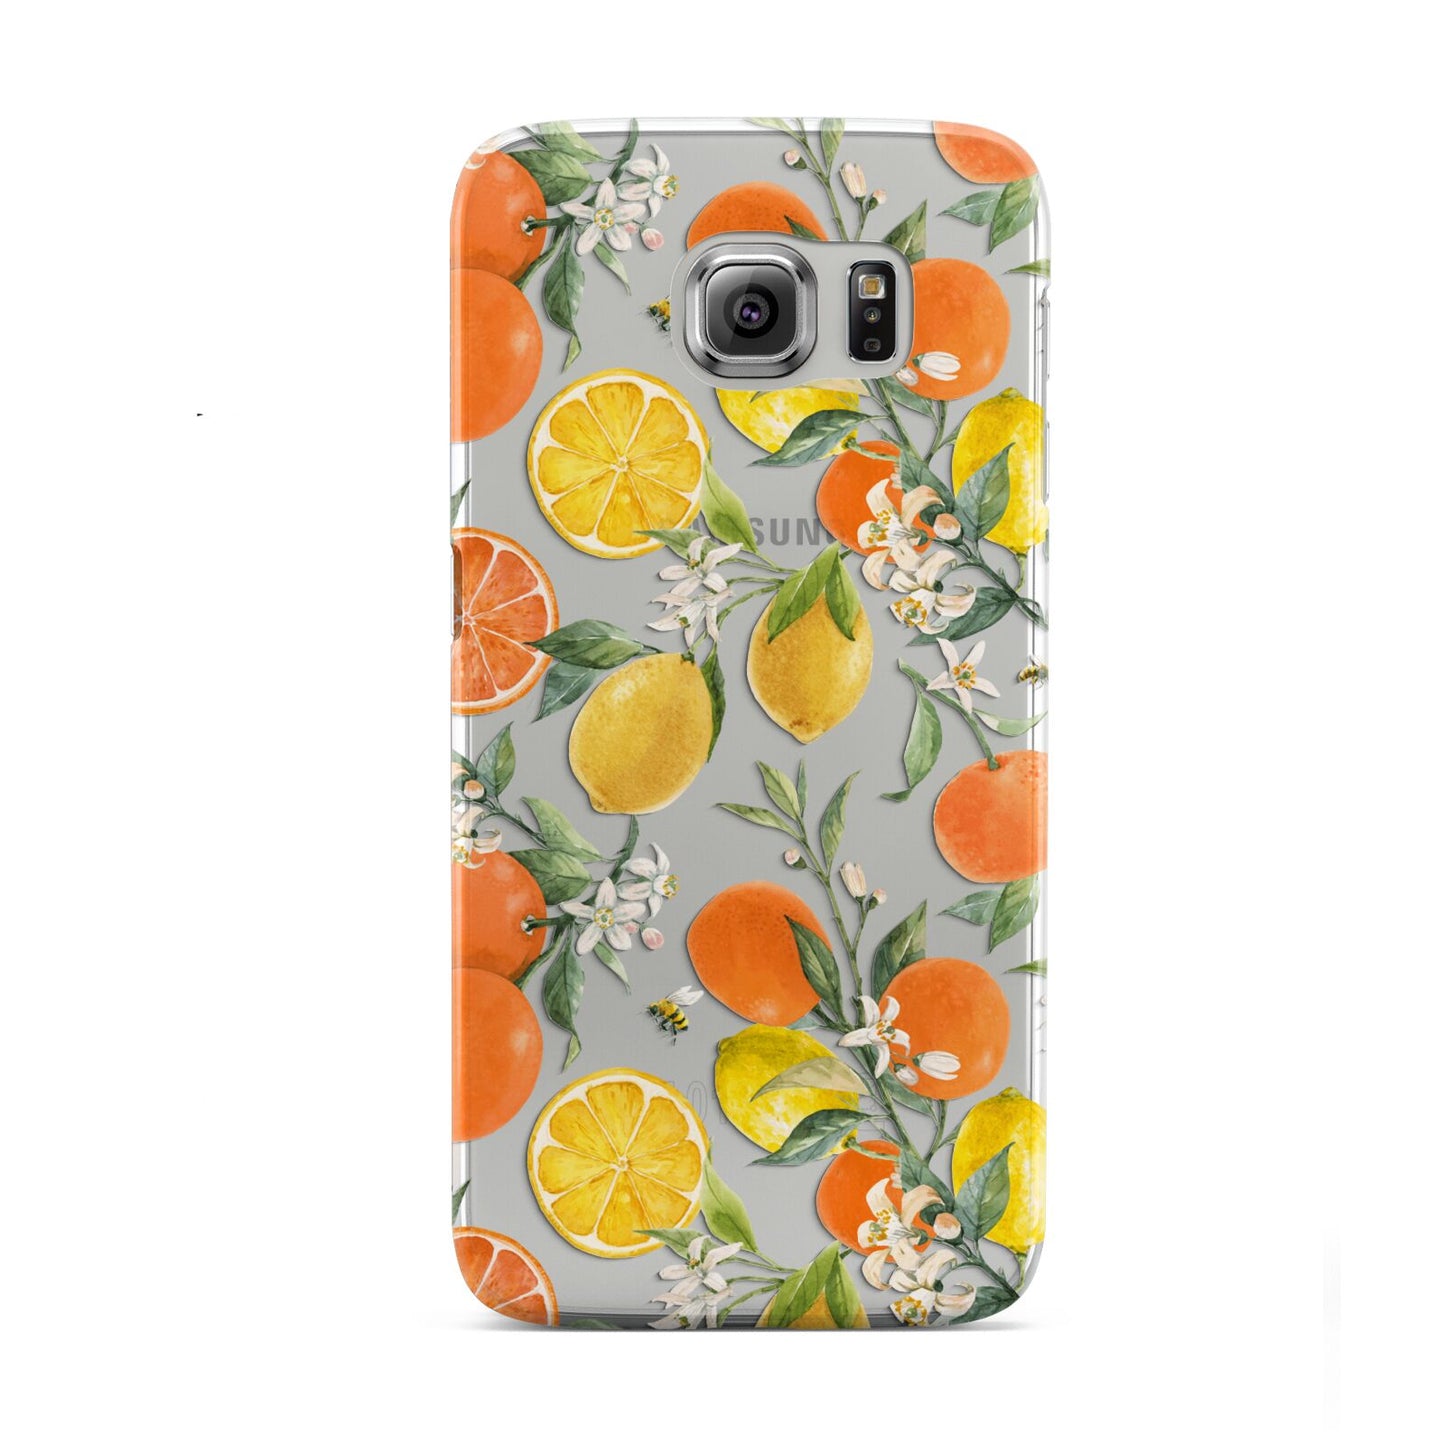 Lemons and Oranges Samsung Galaxy S6 Case